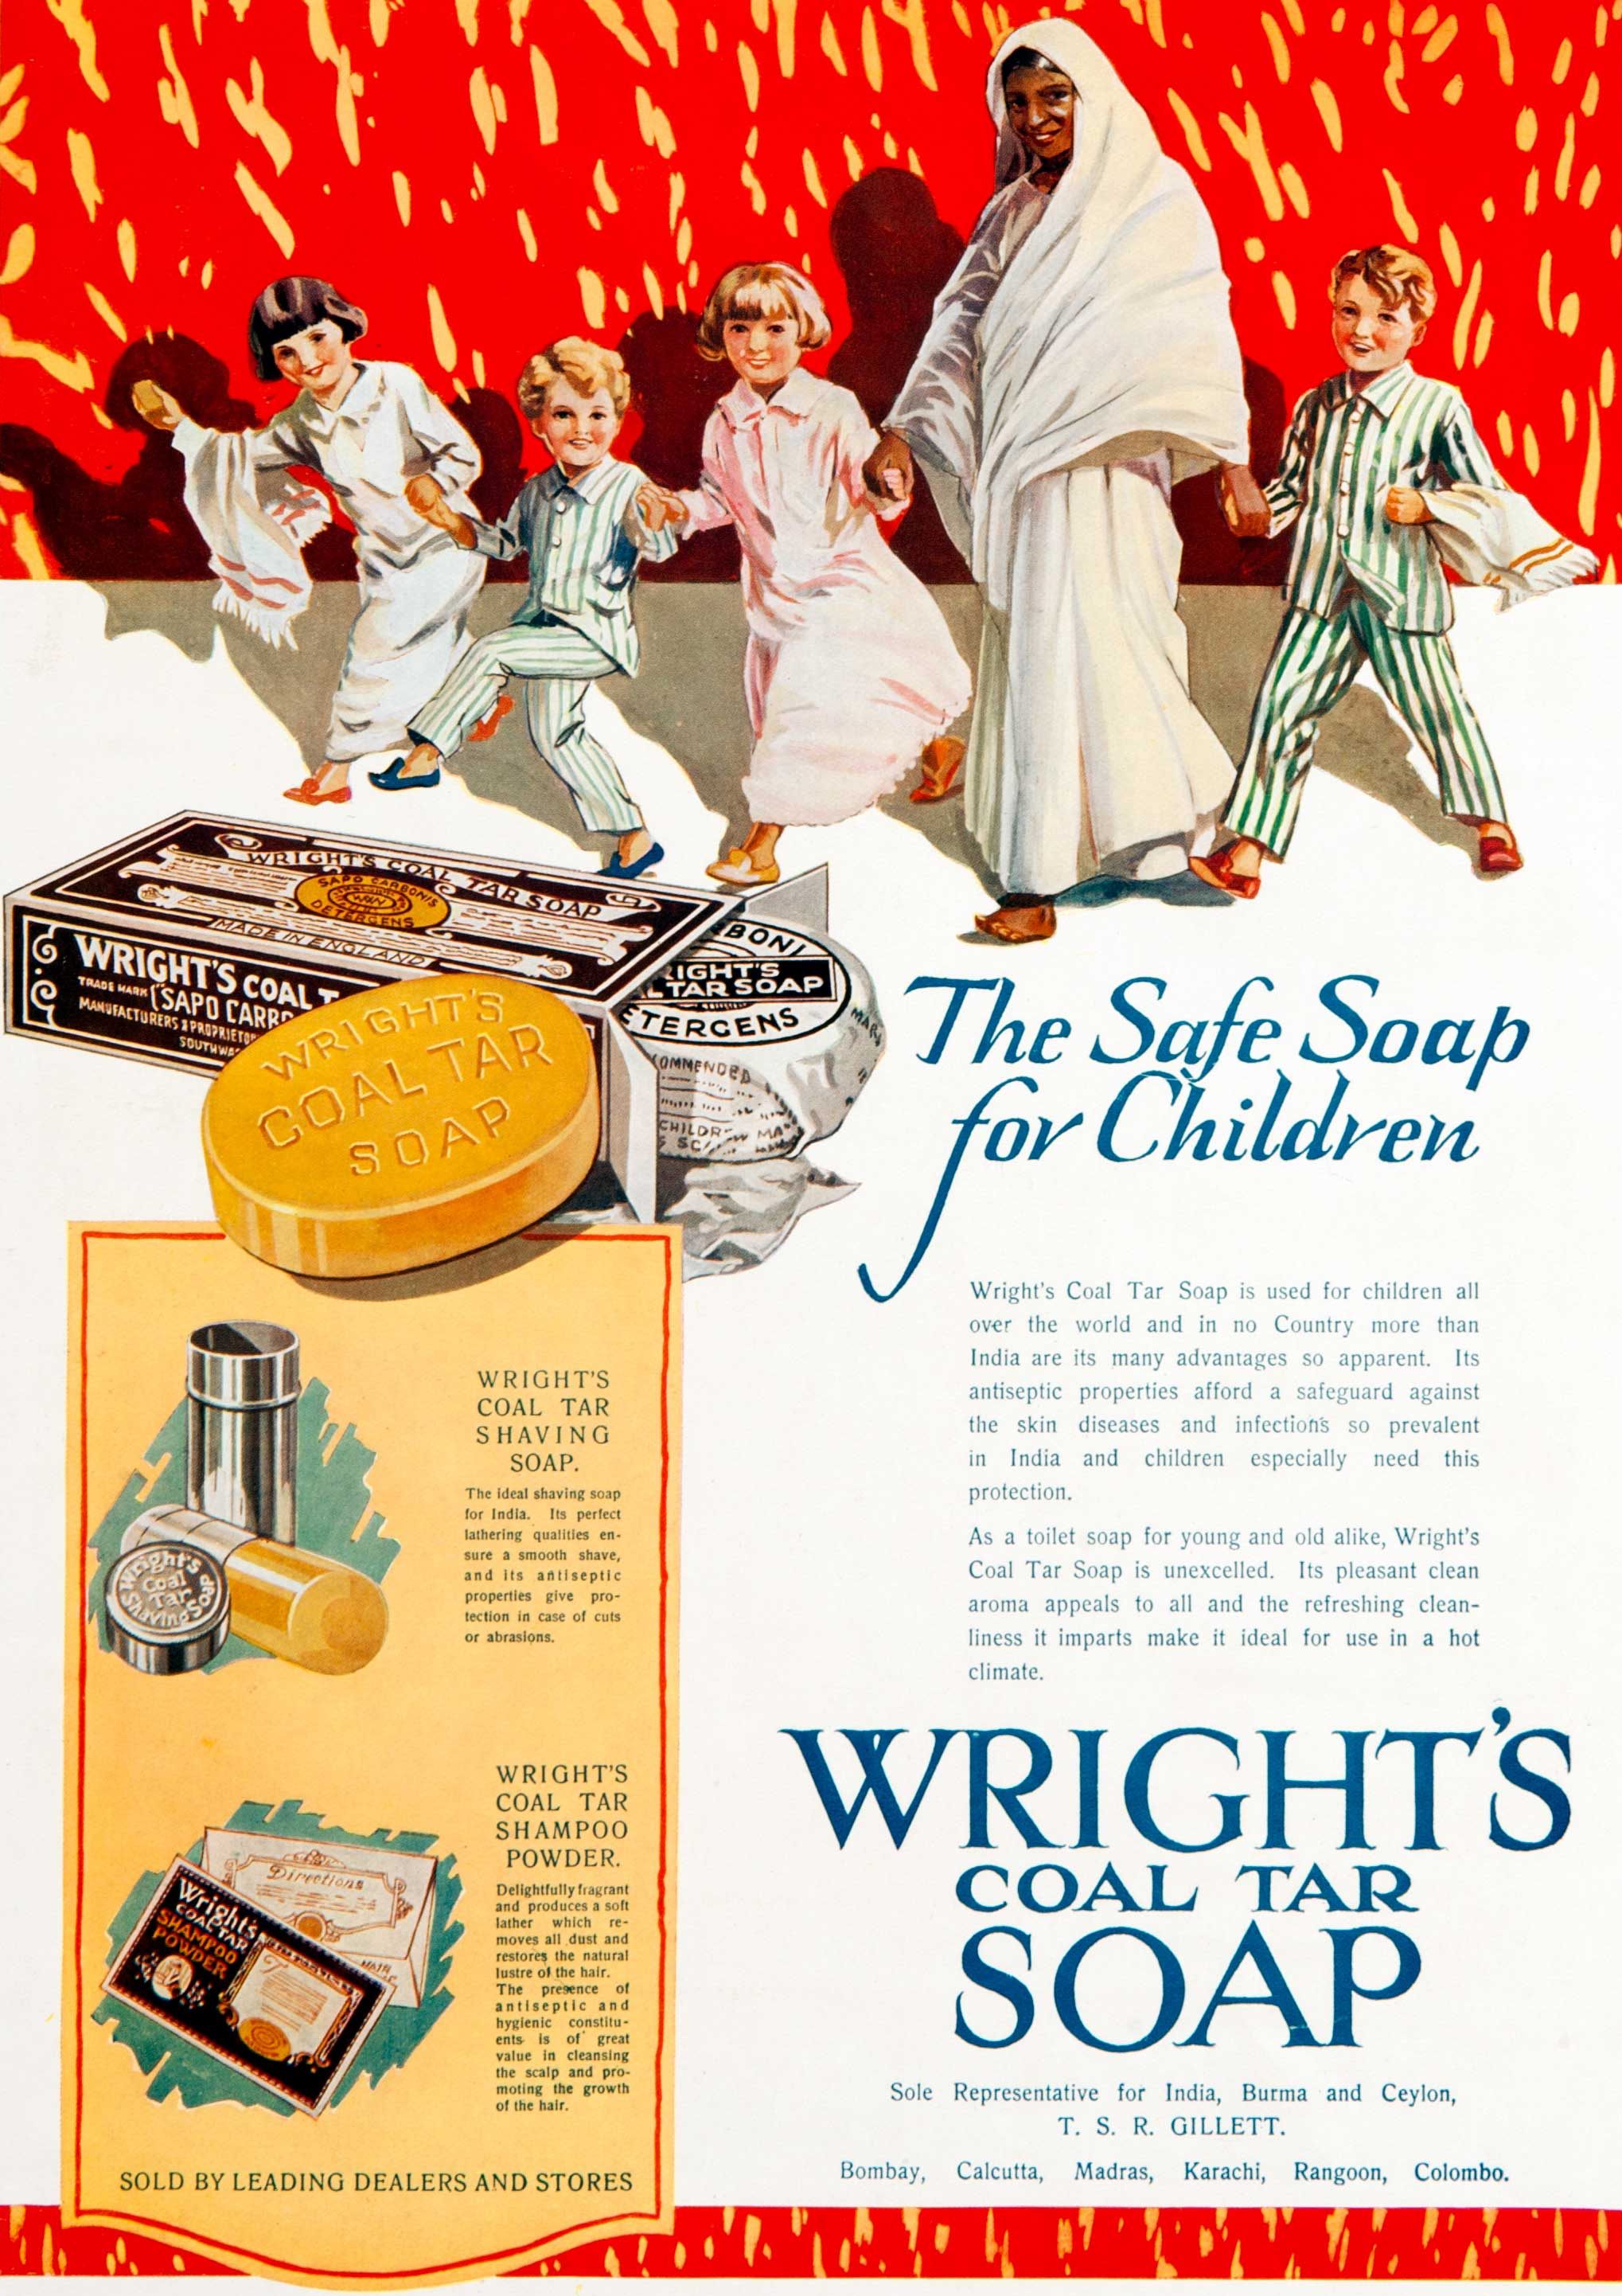 Illustrated at the top are four Caucasian children and a saree-clad Indian woman holding hands in a line and smiling. Below this on the right is promotional text, and on the left are illustrations of Wright’s coal tar soaps, shaving soap and shampoo powder. “The safe soap for children” and “Wright's coal tar soap” are emphasised stylistically in bold and blue in the poster.